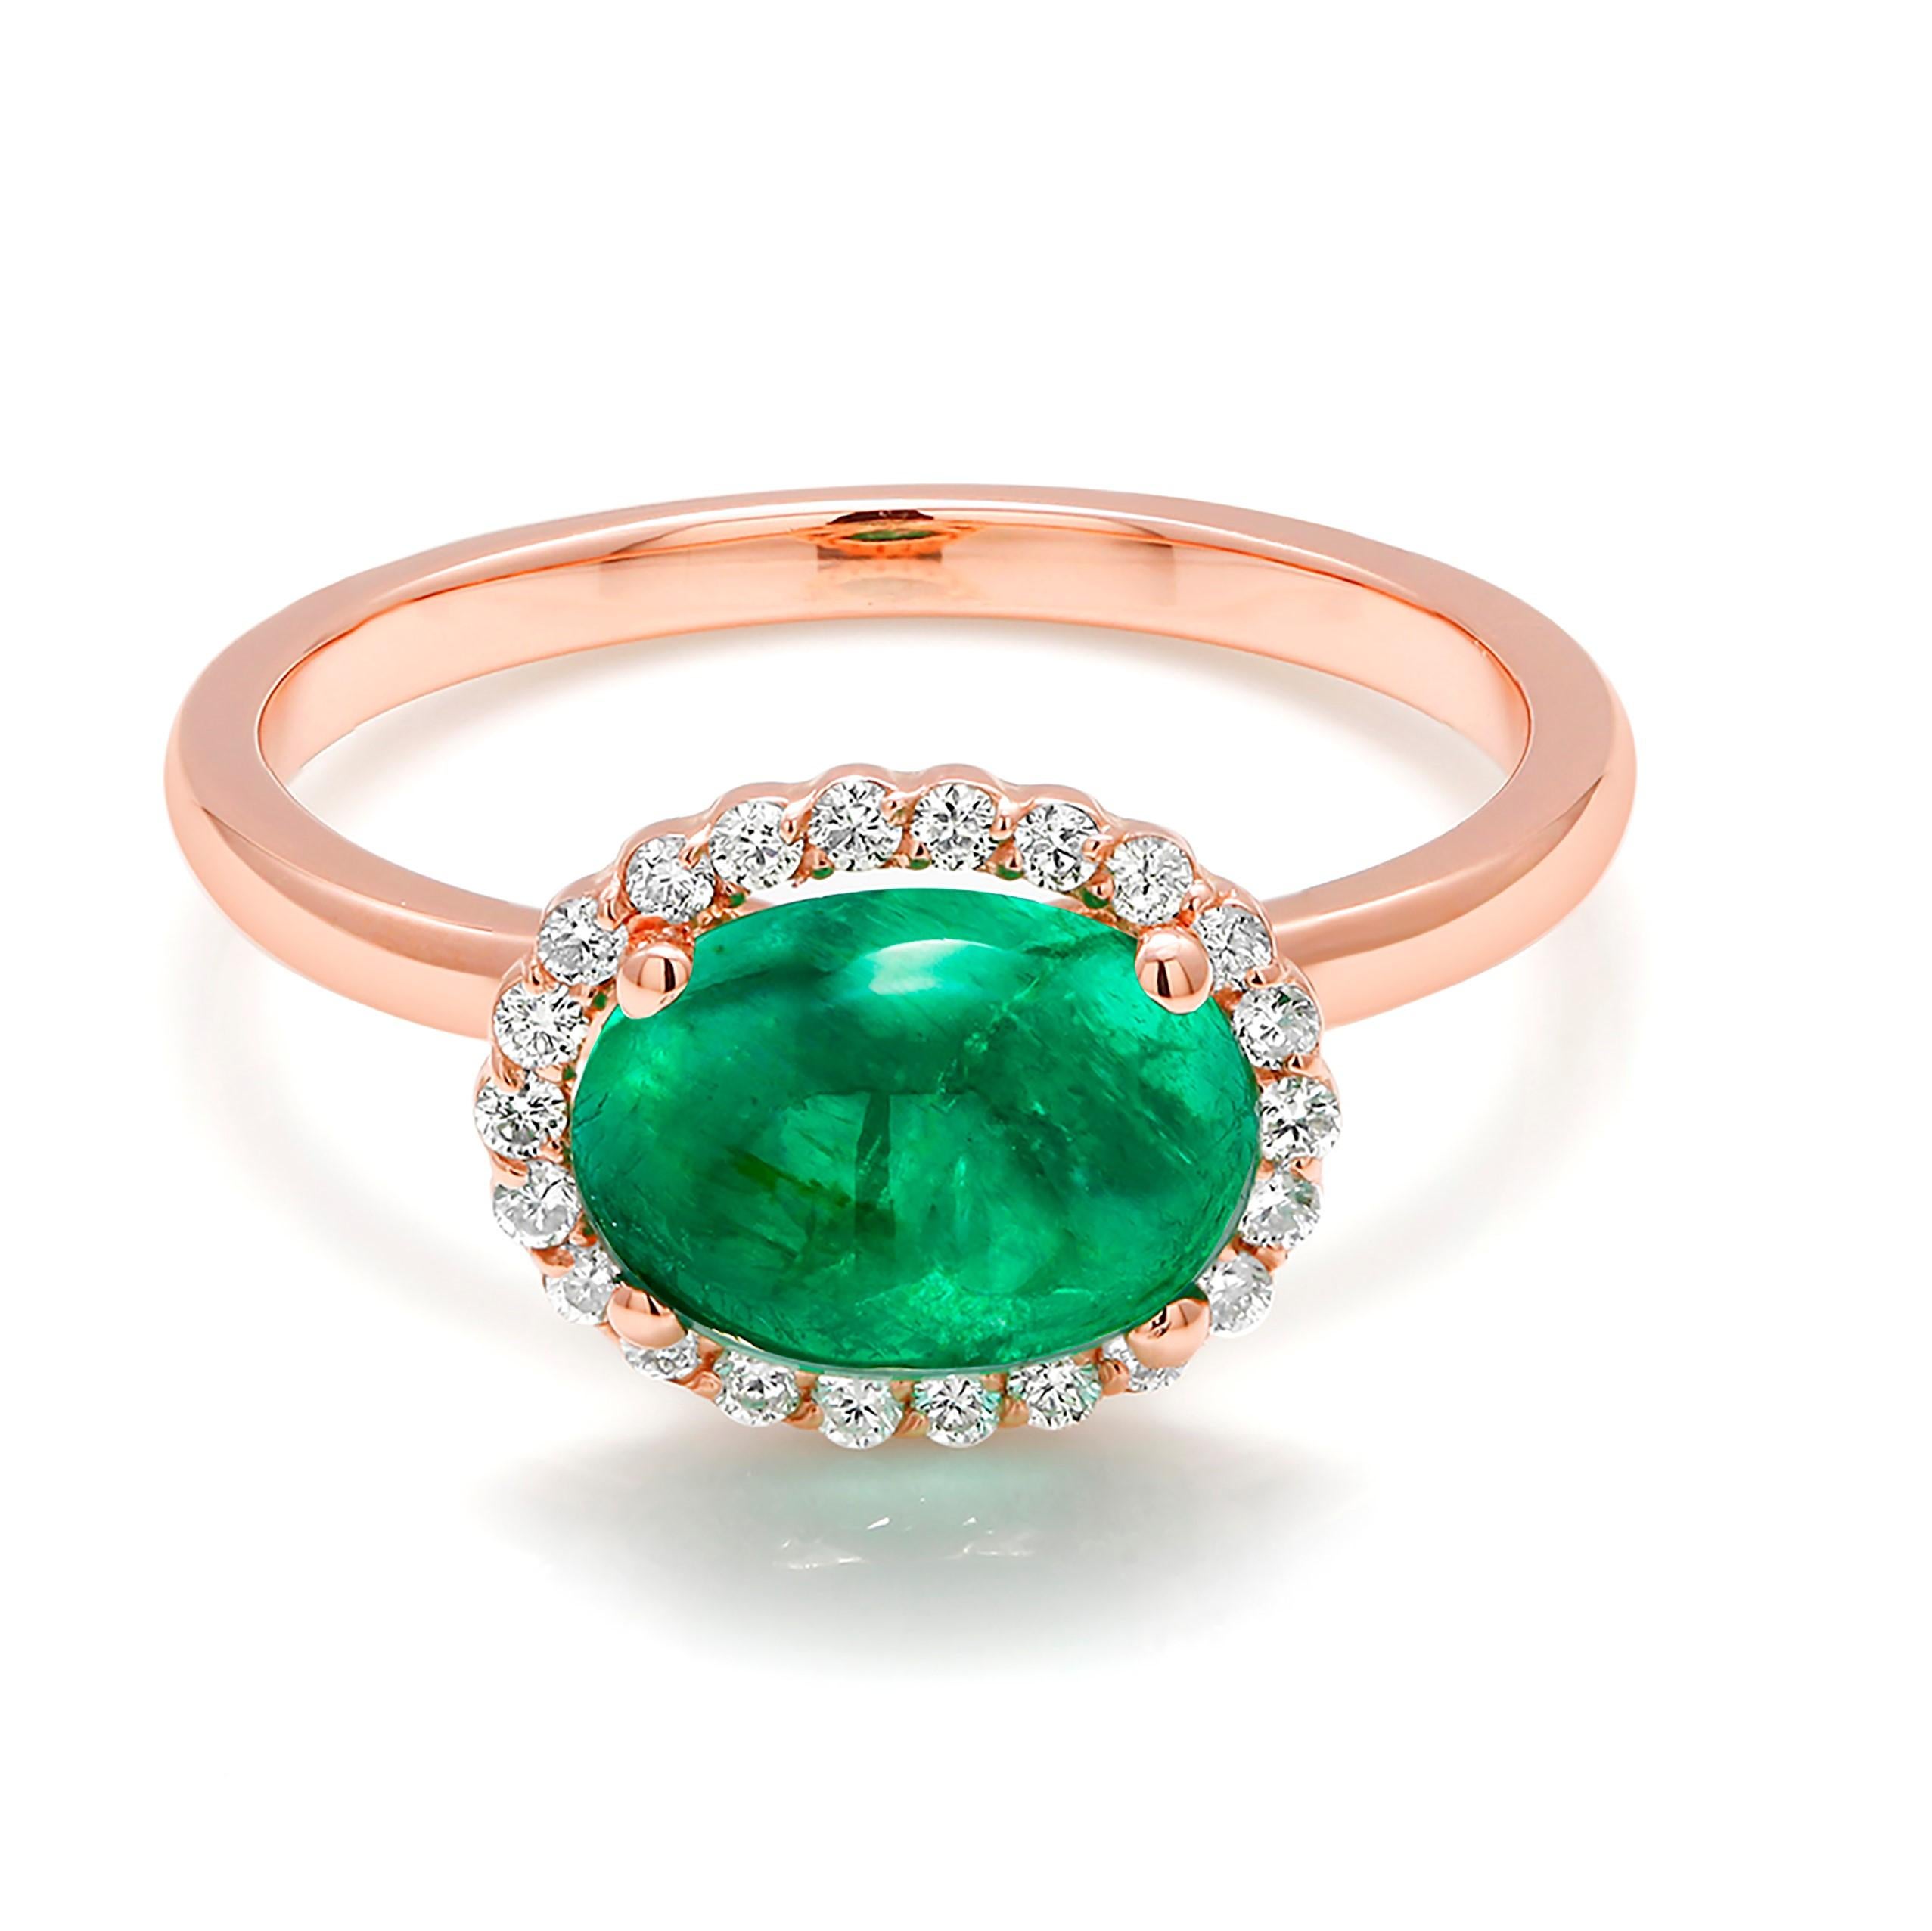 Fourteen karats rose gold cluster  ring 
Oval shape cabochon emerald weighing 2.00 carats
Surrounded by pave set diamonds weighing 0.24 carat
Ring size 7 In Stock
Emerald hue tone color is deep emerald green
New Ring
The ring can be slightly resized